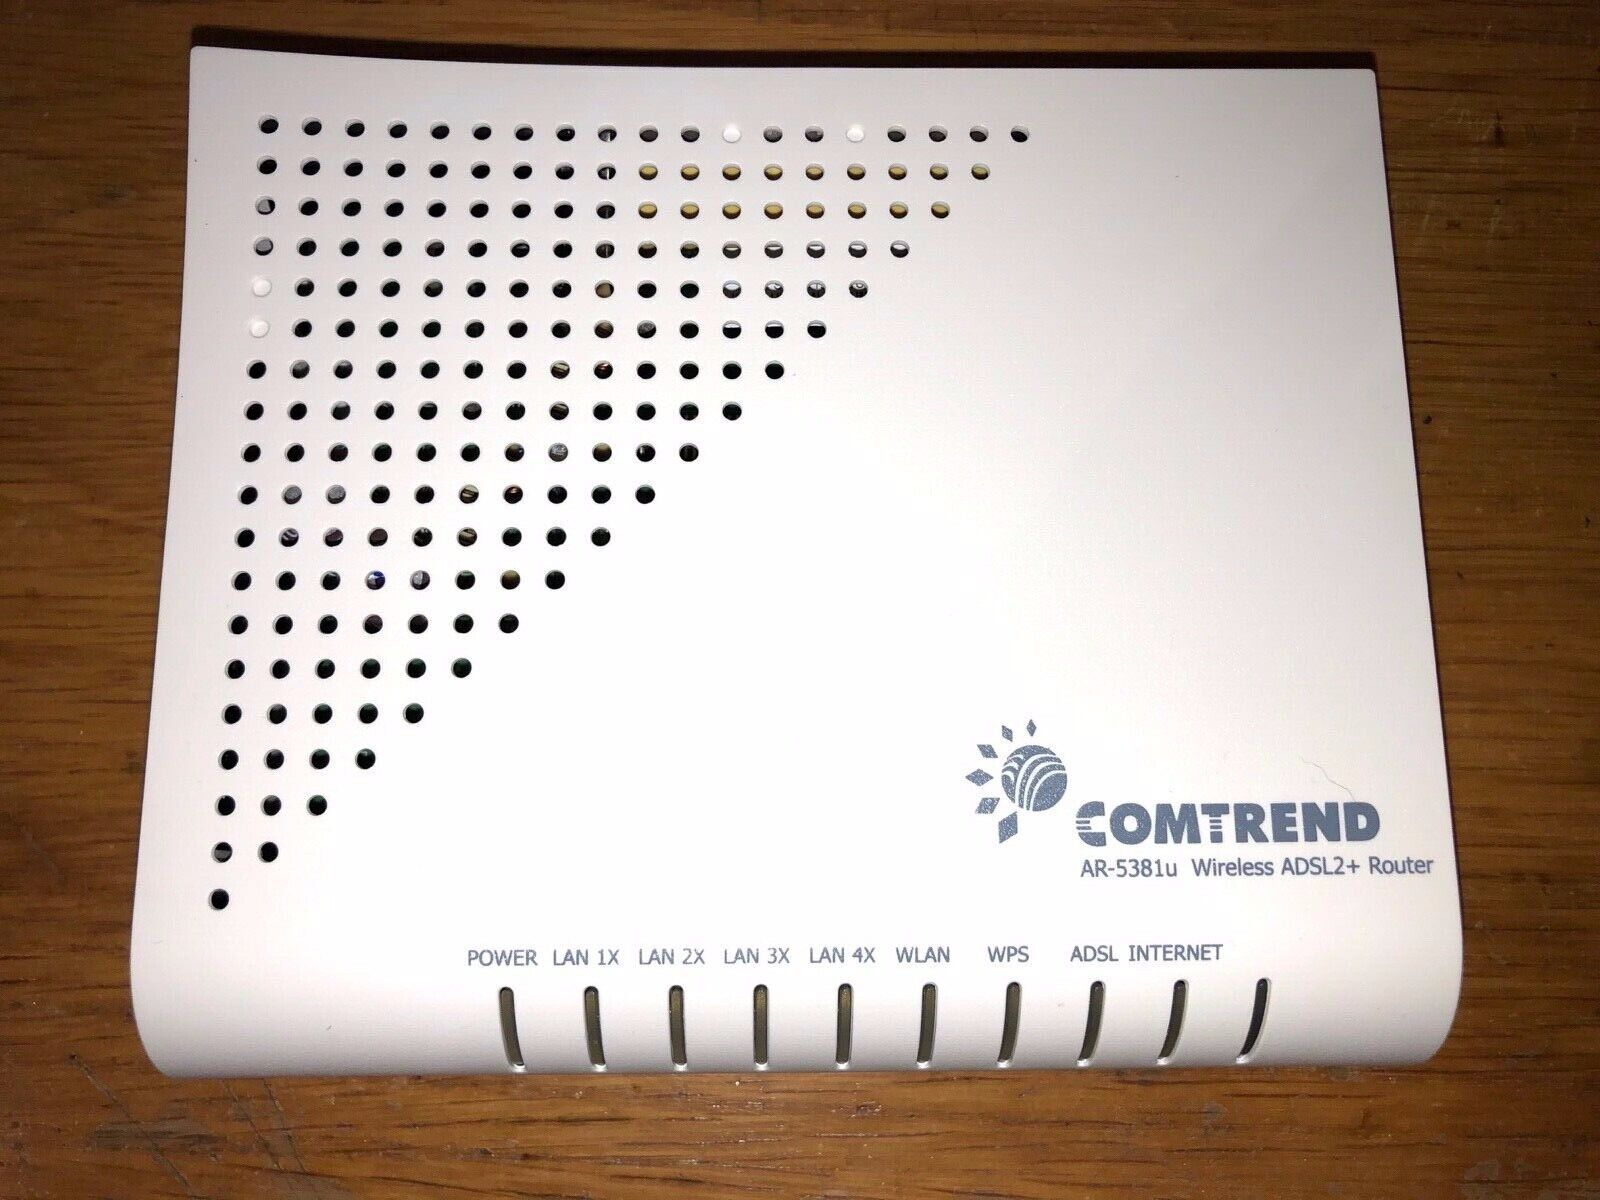 Comtrend Wireless ADSL2+ Router Model AR-5381u Power Supply Line Cables